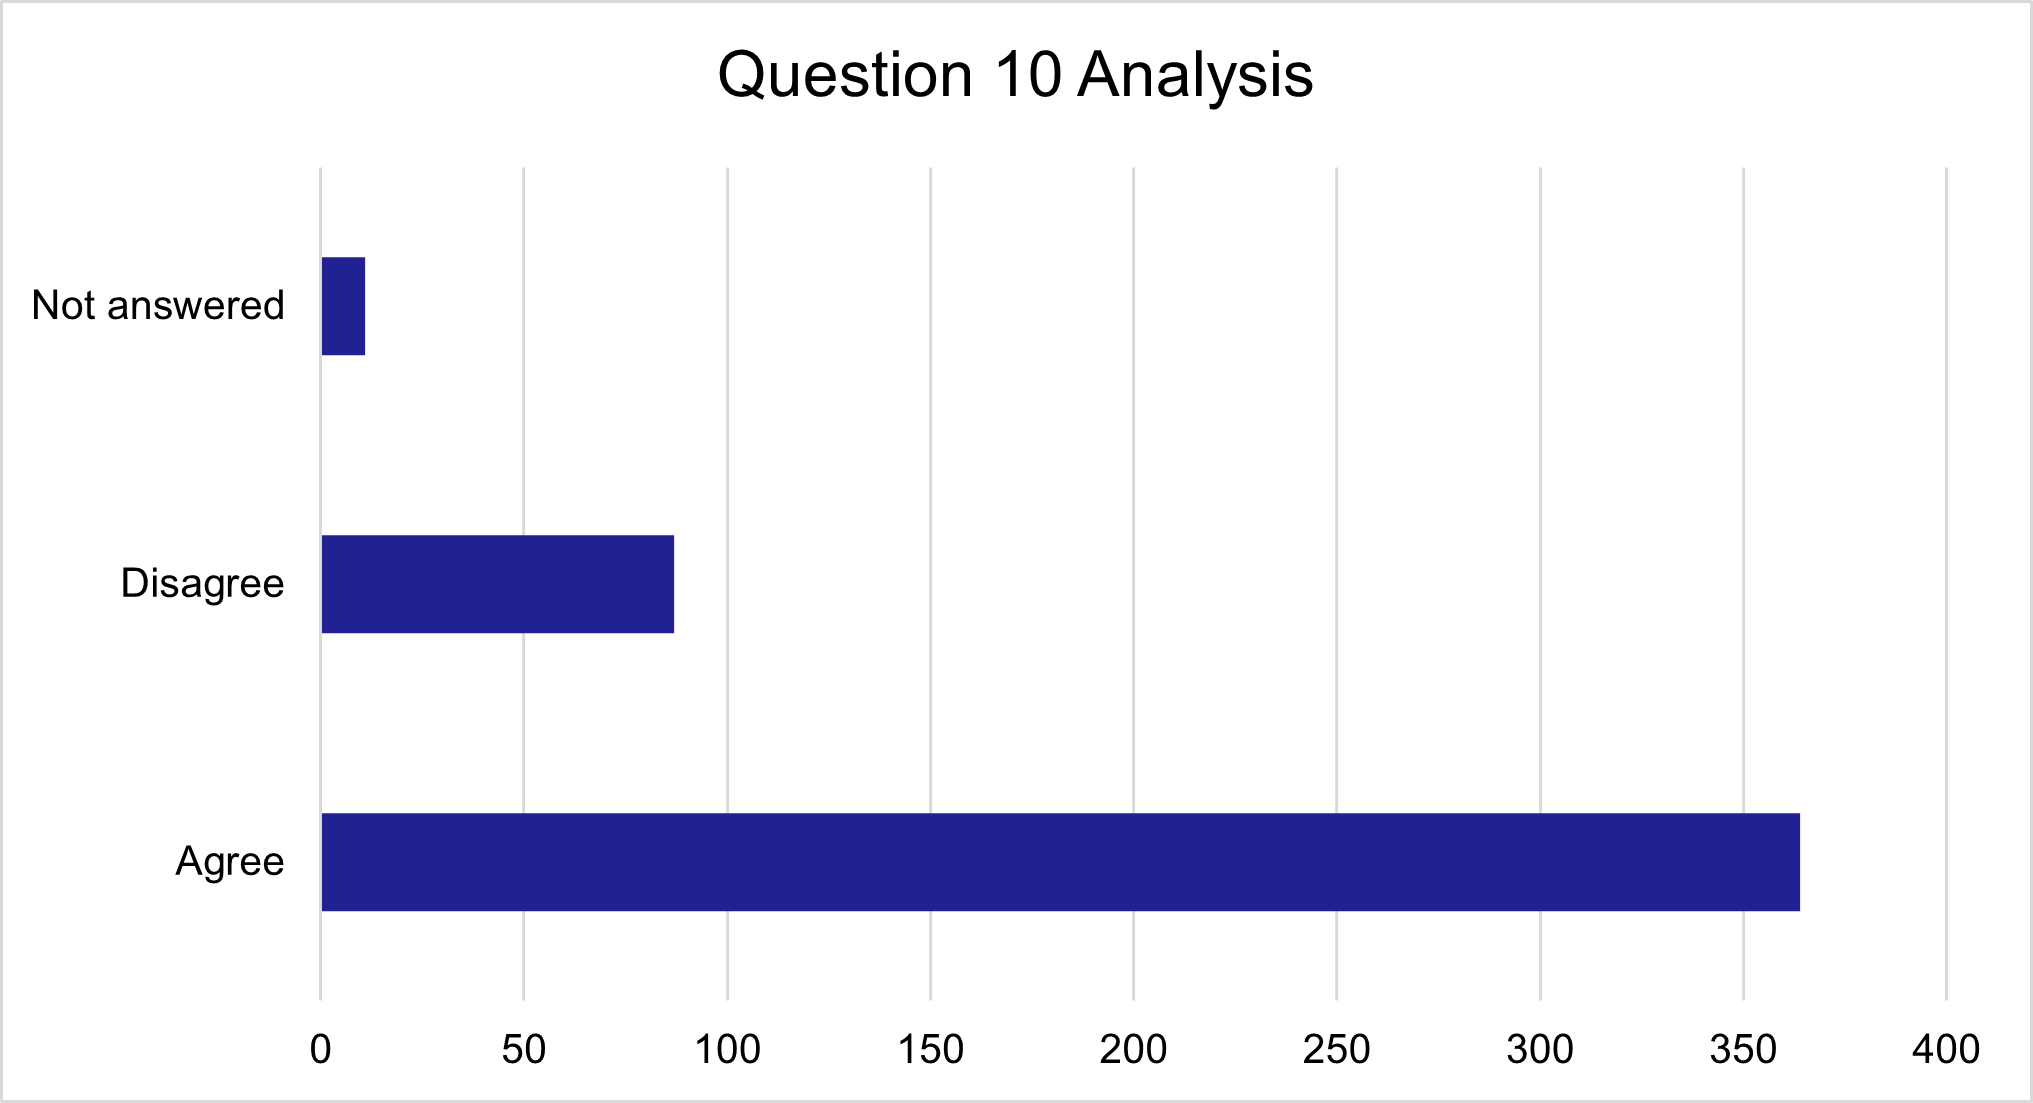 Question 10 responses, as described in text